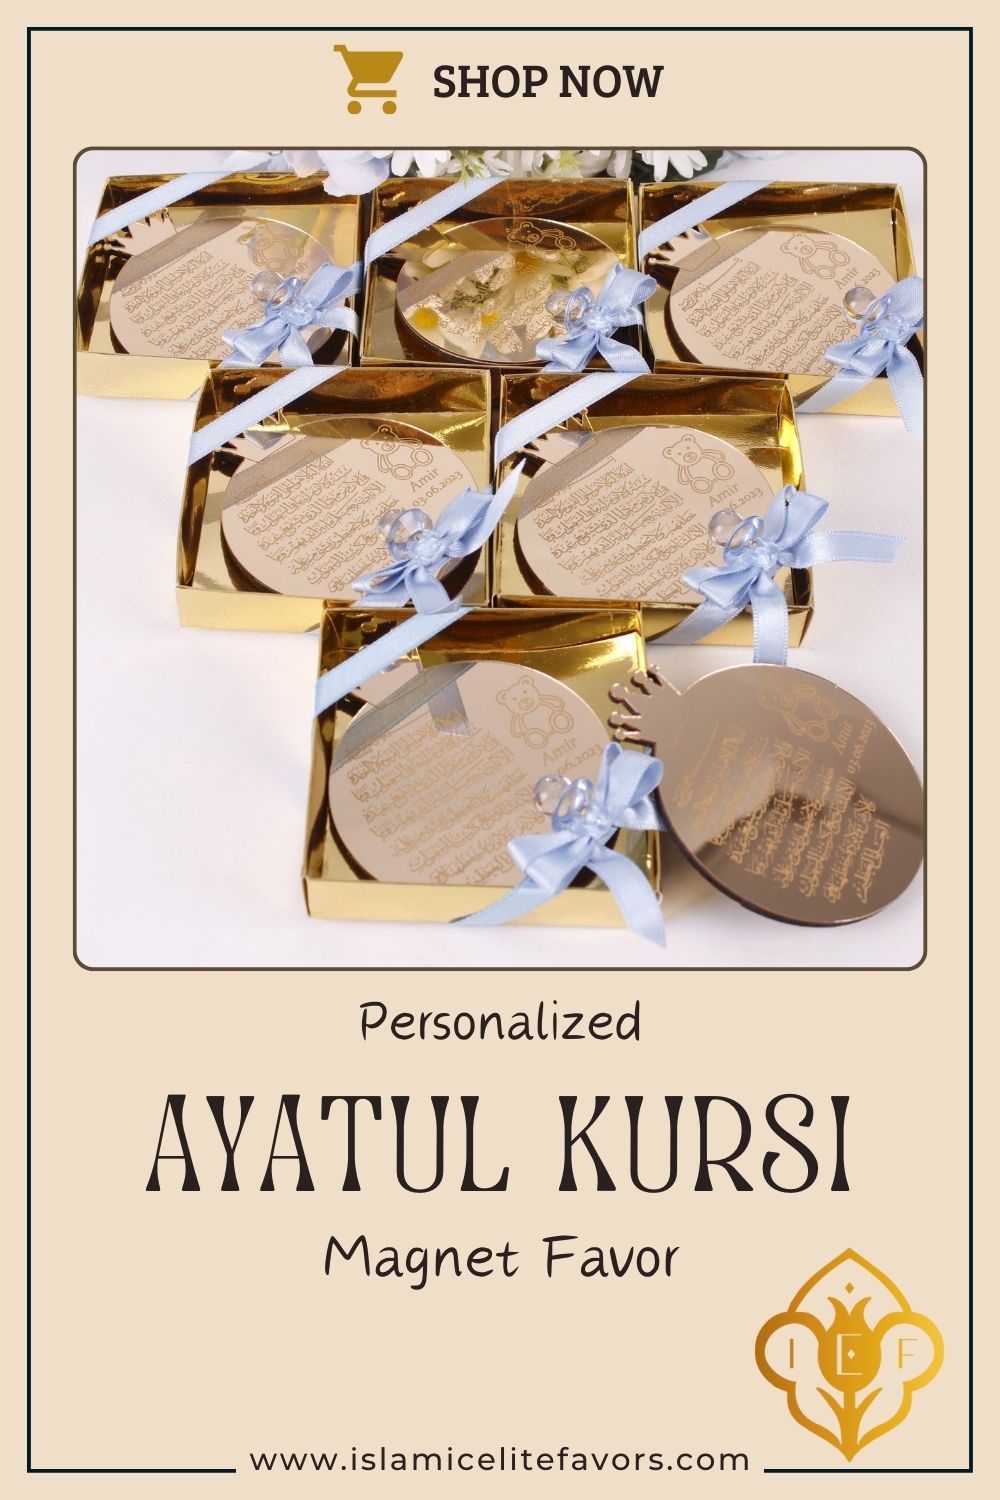 Personalized Ayatul Kursi Baby Shower Magnet Favor for Guest in Bulk. Explore an exquisite collection of customized Islamic handmade gifts suitable for various occasions, including Weddings, Nikkah ceremonies, Engagements, Baby Showers, Bridal Showers, Birthdays, Ameen celebrations, Islamic parties, Ramadan, Eid, Hajj, Umrah, Mother’s Day, Father’s Day, Valentine’s Day, Anniversaries, and Graduations. Each gift is thoughtfully crafted to reflect the essence of these special moments.